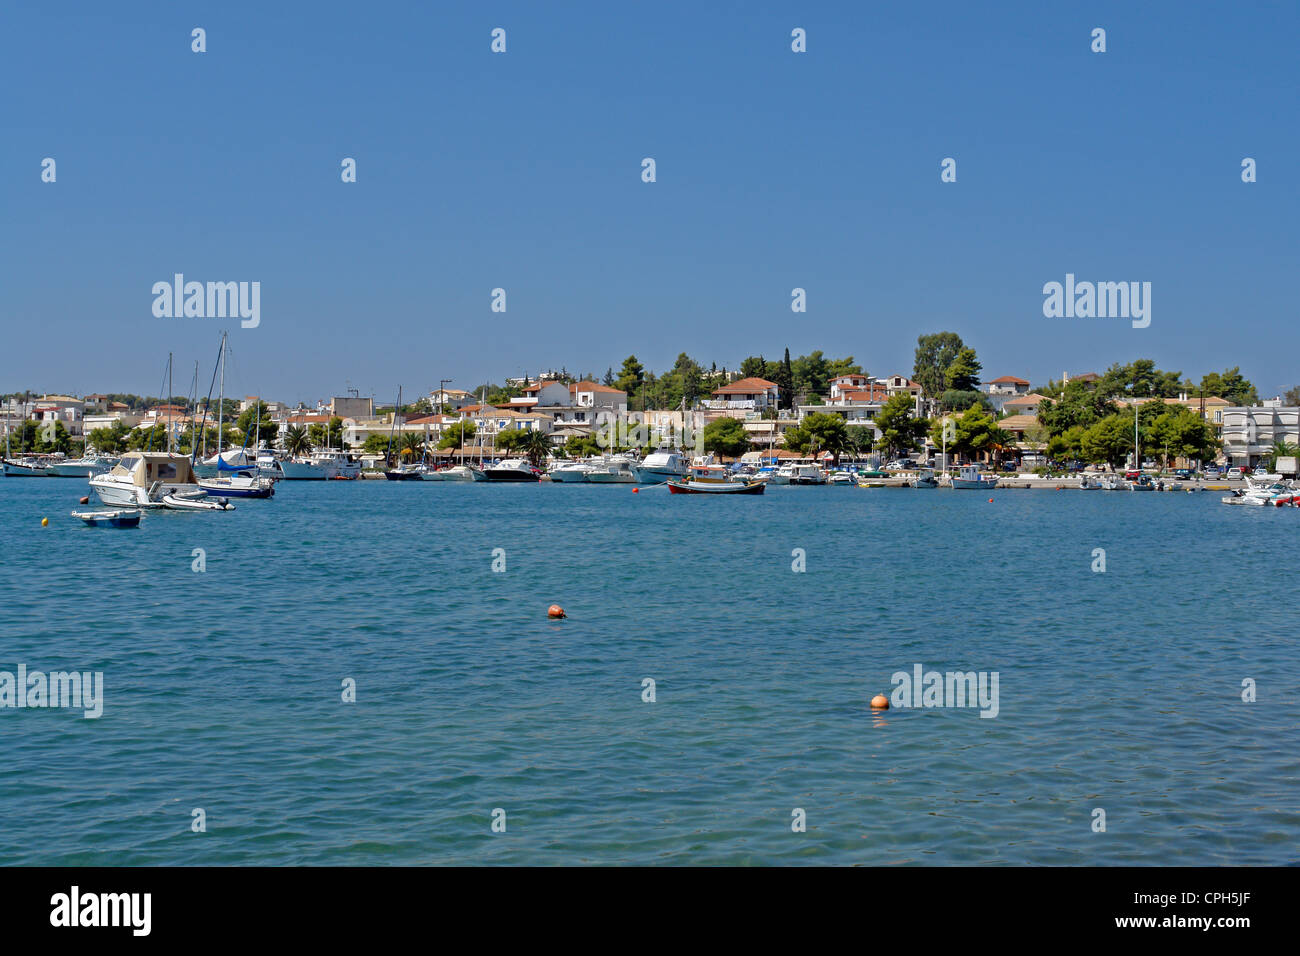 Europe, Greece, Pelepones, Porto Heli, sports boat harbour, place, bungalows, trees, boats, vehicles, vessels, buildings, constr Stock Photo